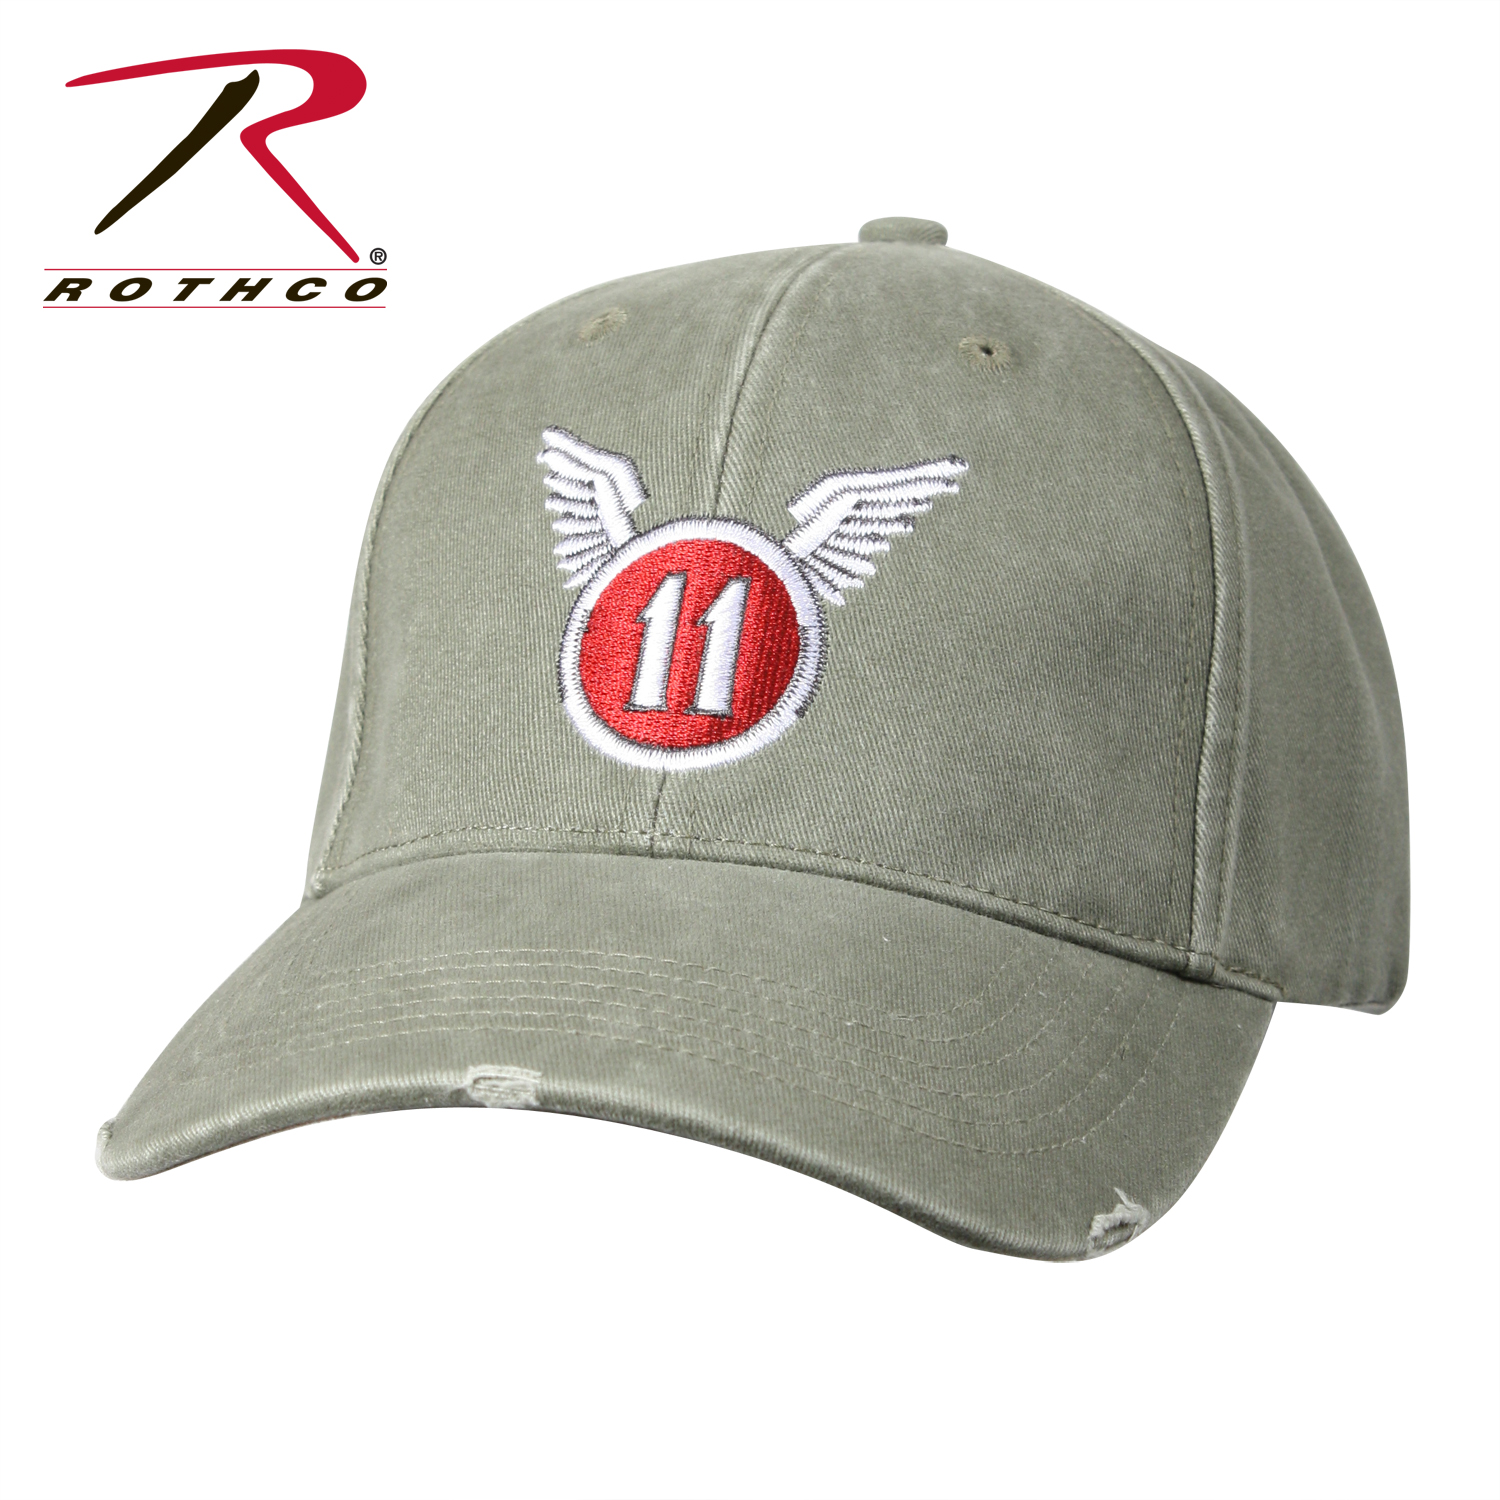 CASQUETTE U.S. DELUXE VINTAGE - ROTHCO - 11TH AIRBONE